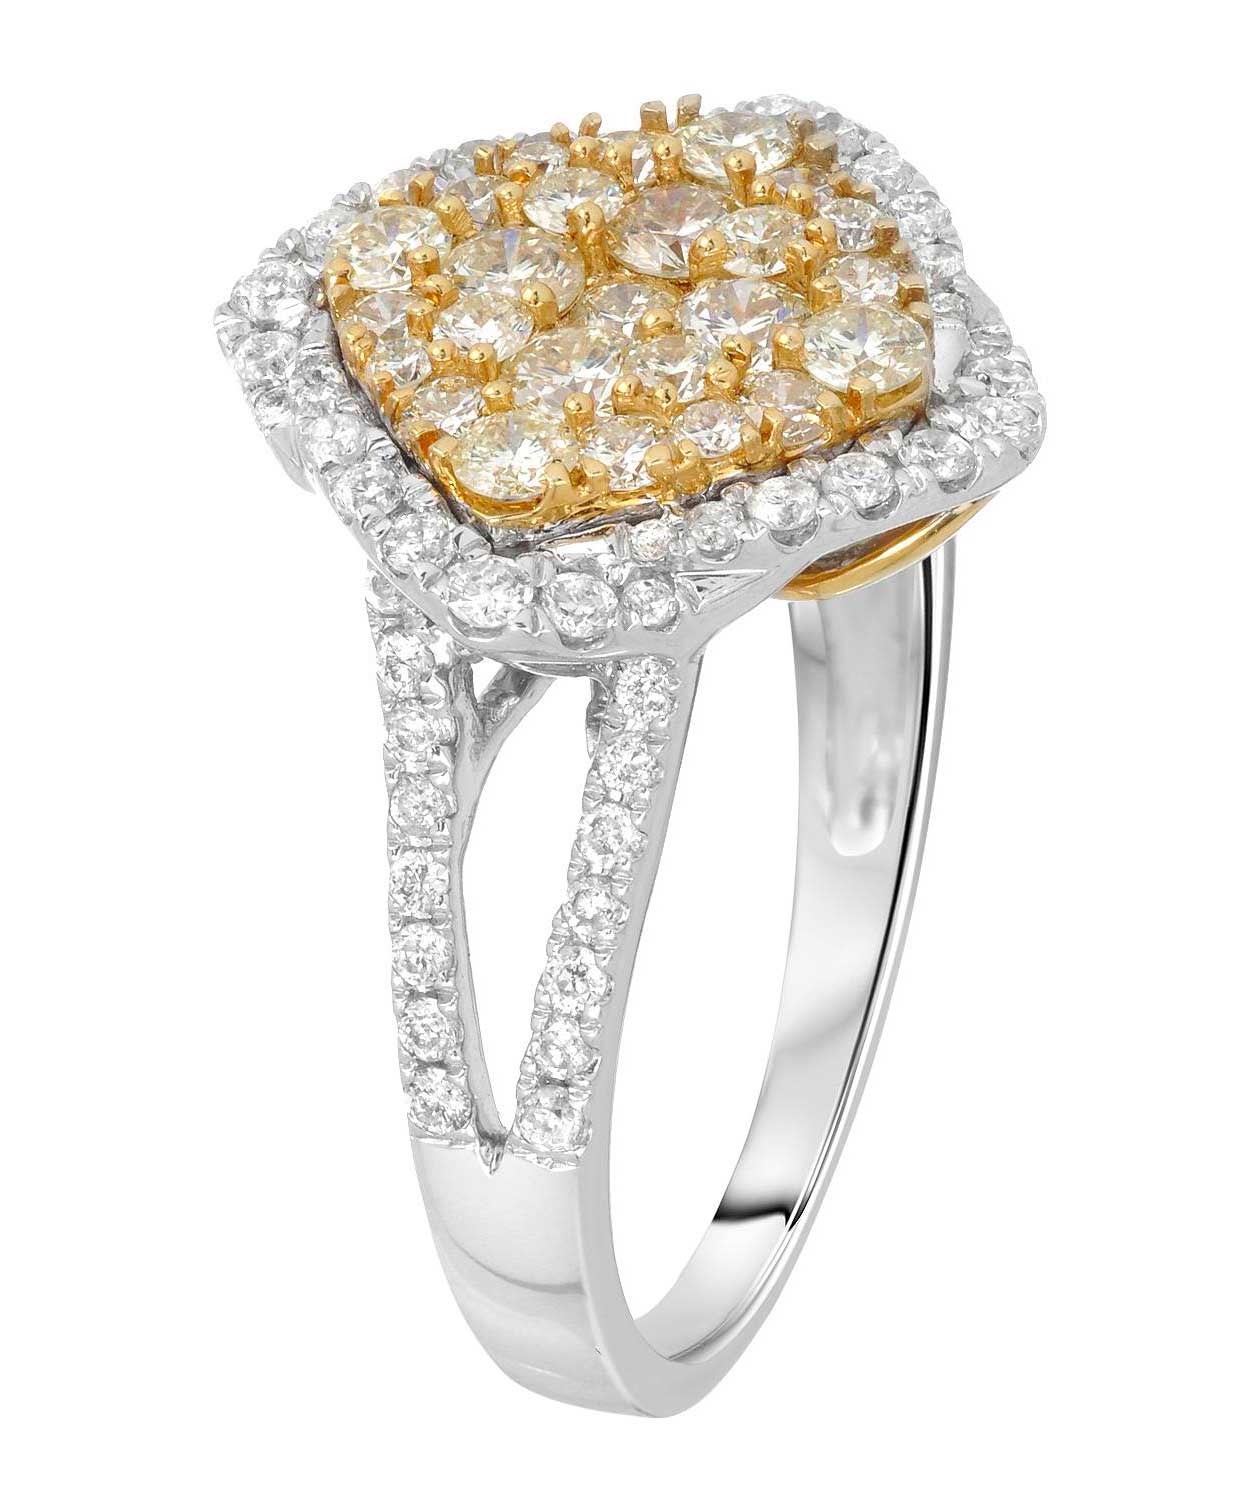 Signature Collection 1.46 ctw Fancy Yellow Diamond 14k Gold Cluster Right Hand Ring View 2